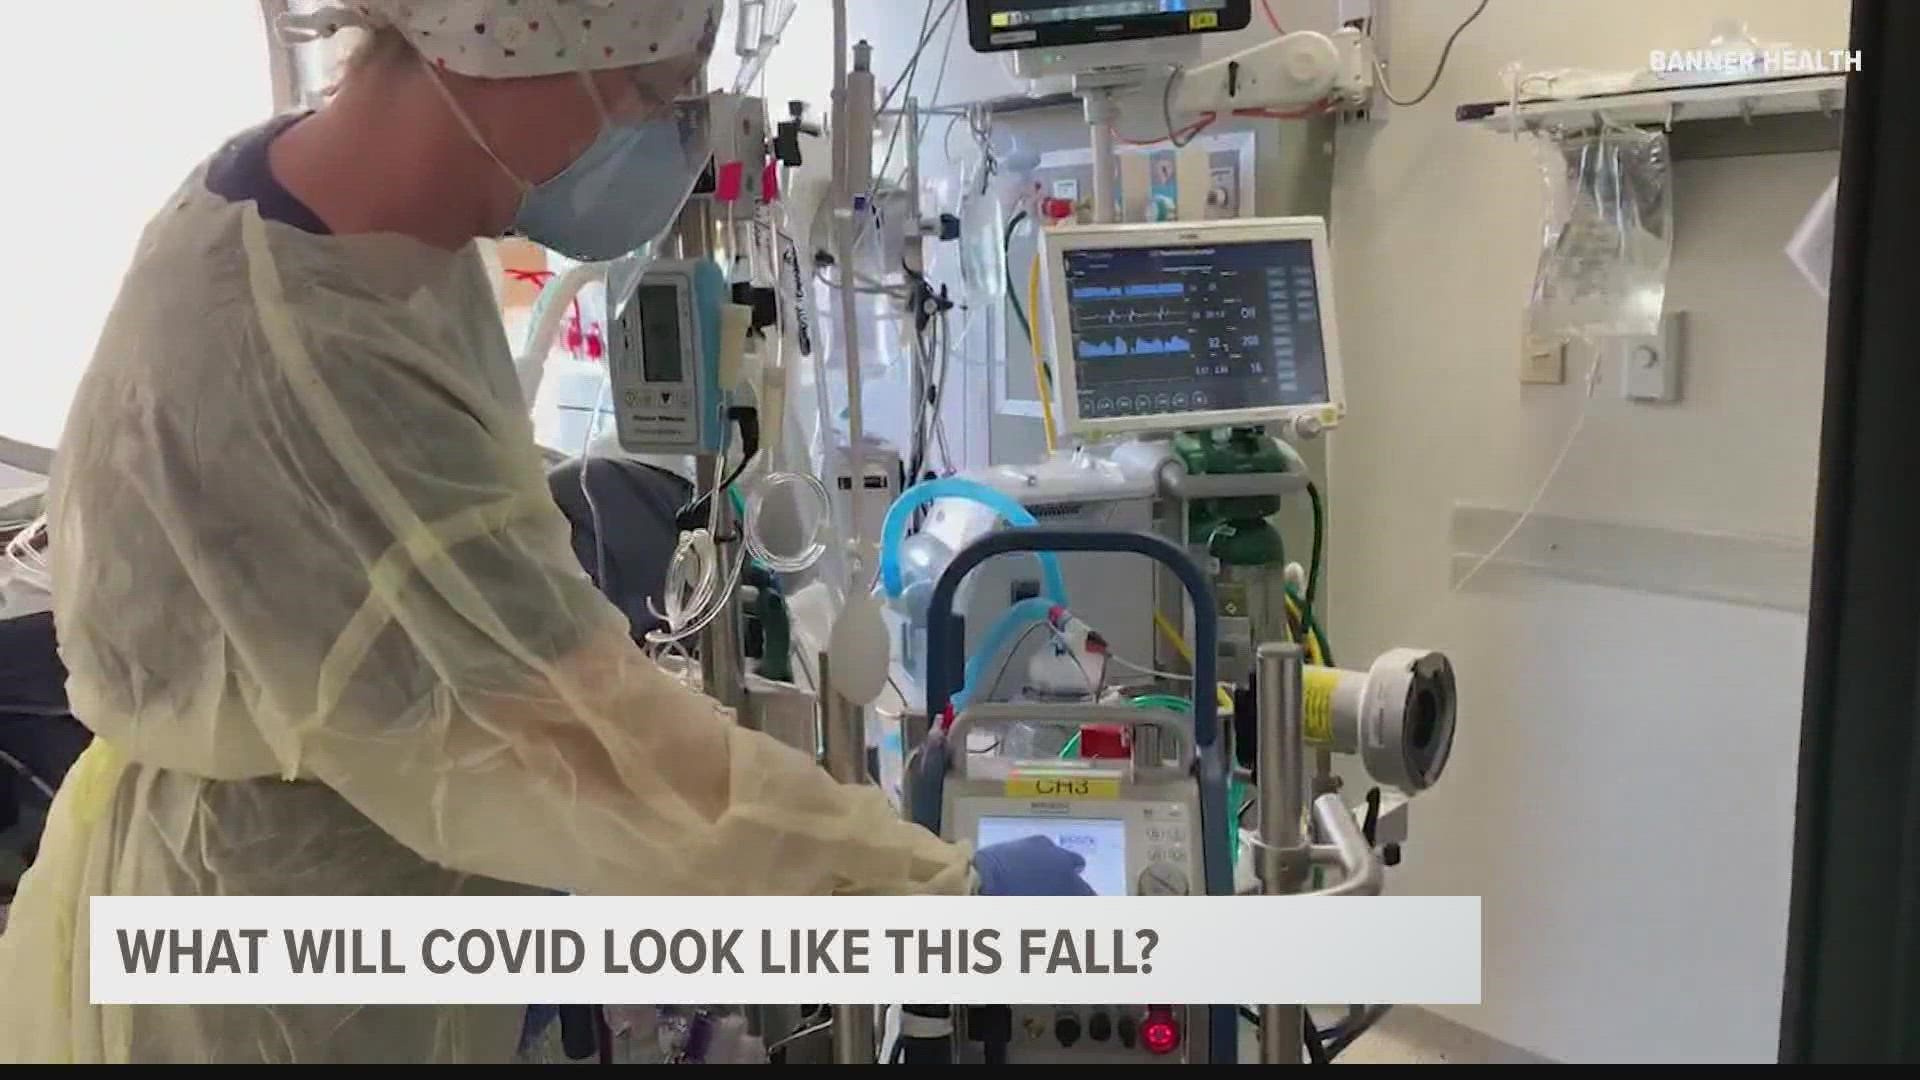 Dr. Joe Gerald of the University of Arizona told 12 News he's optimistic Arizona's infection rates for COVID-19 could be on a downward trajectory in the near future.